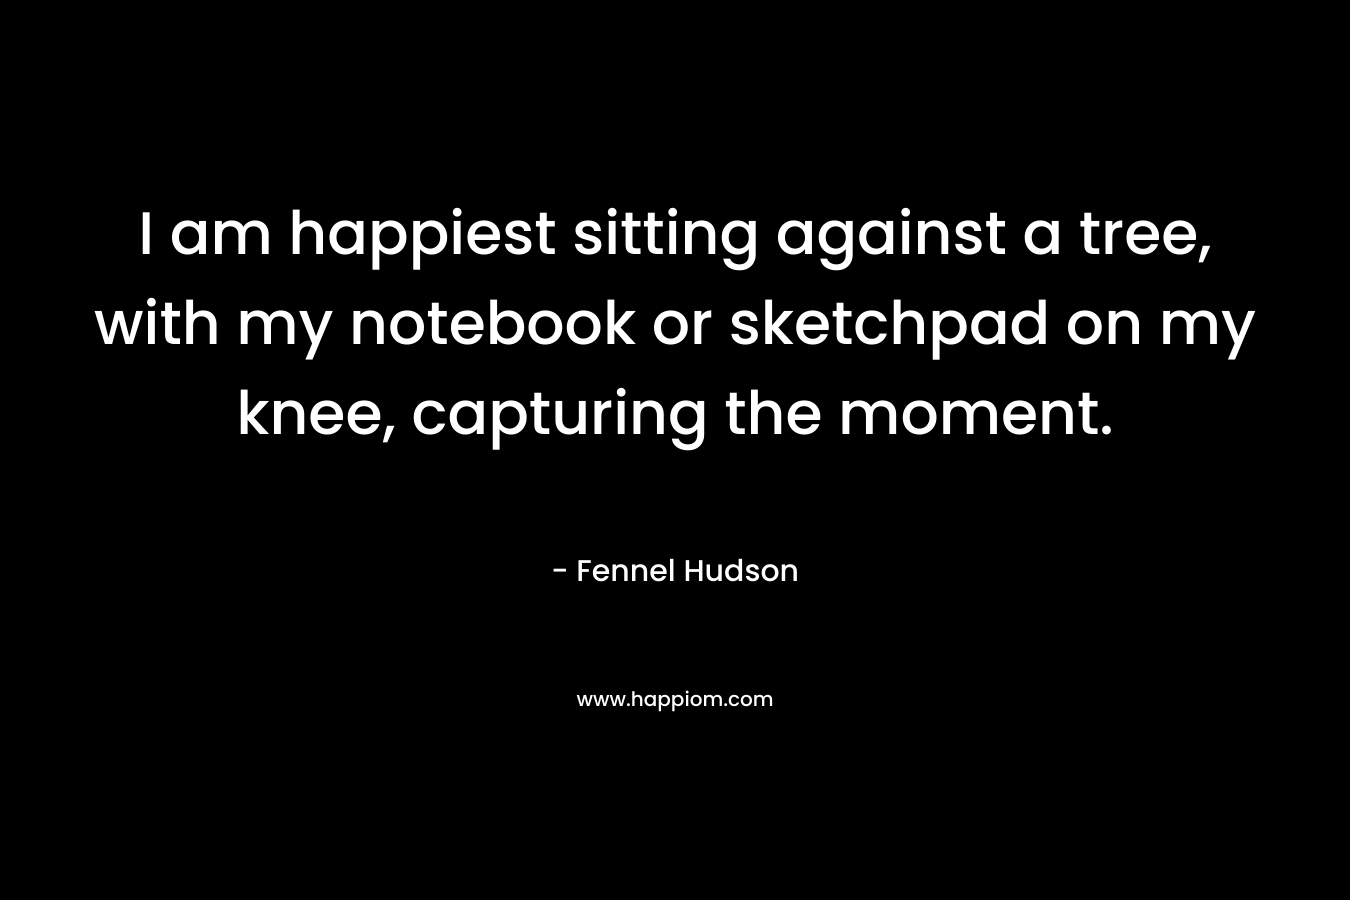 I am happiest sitting against a tree, with my notebook or sketchpad on my knee, capturing the moment. – Fennel Hudson